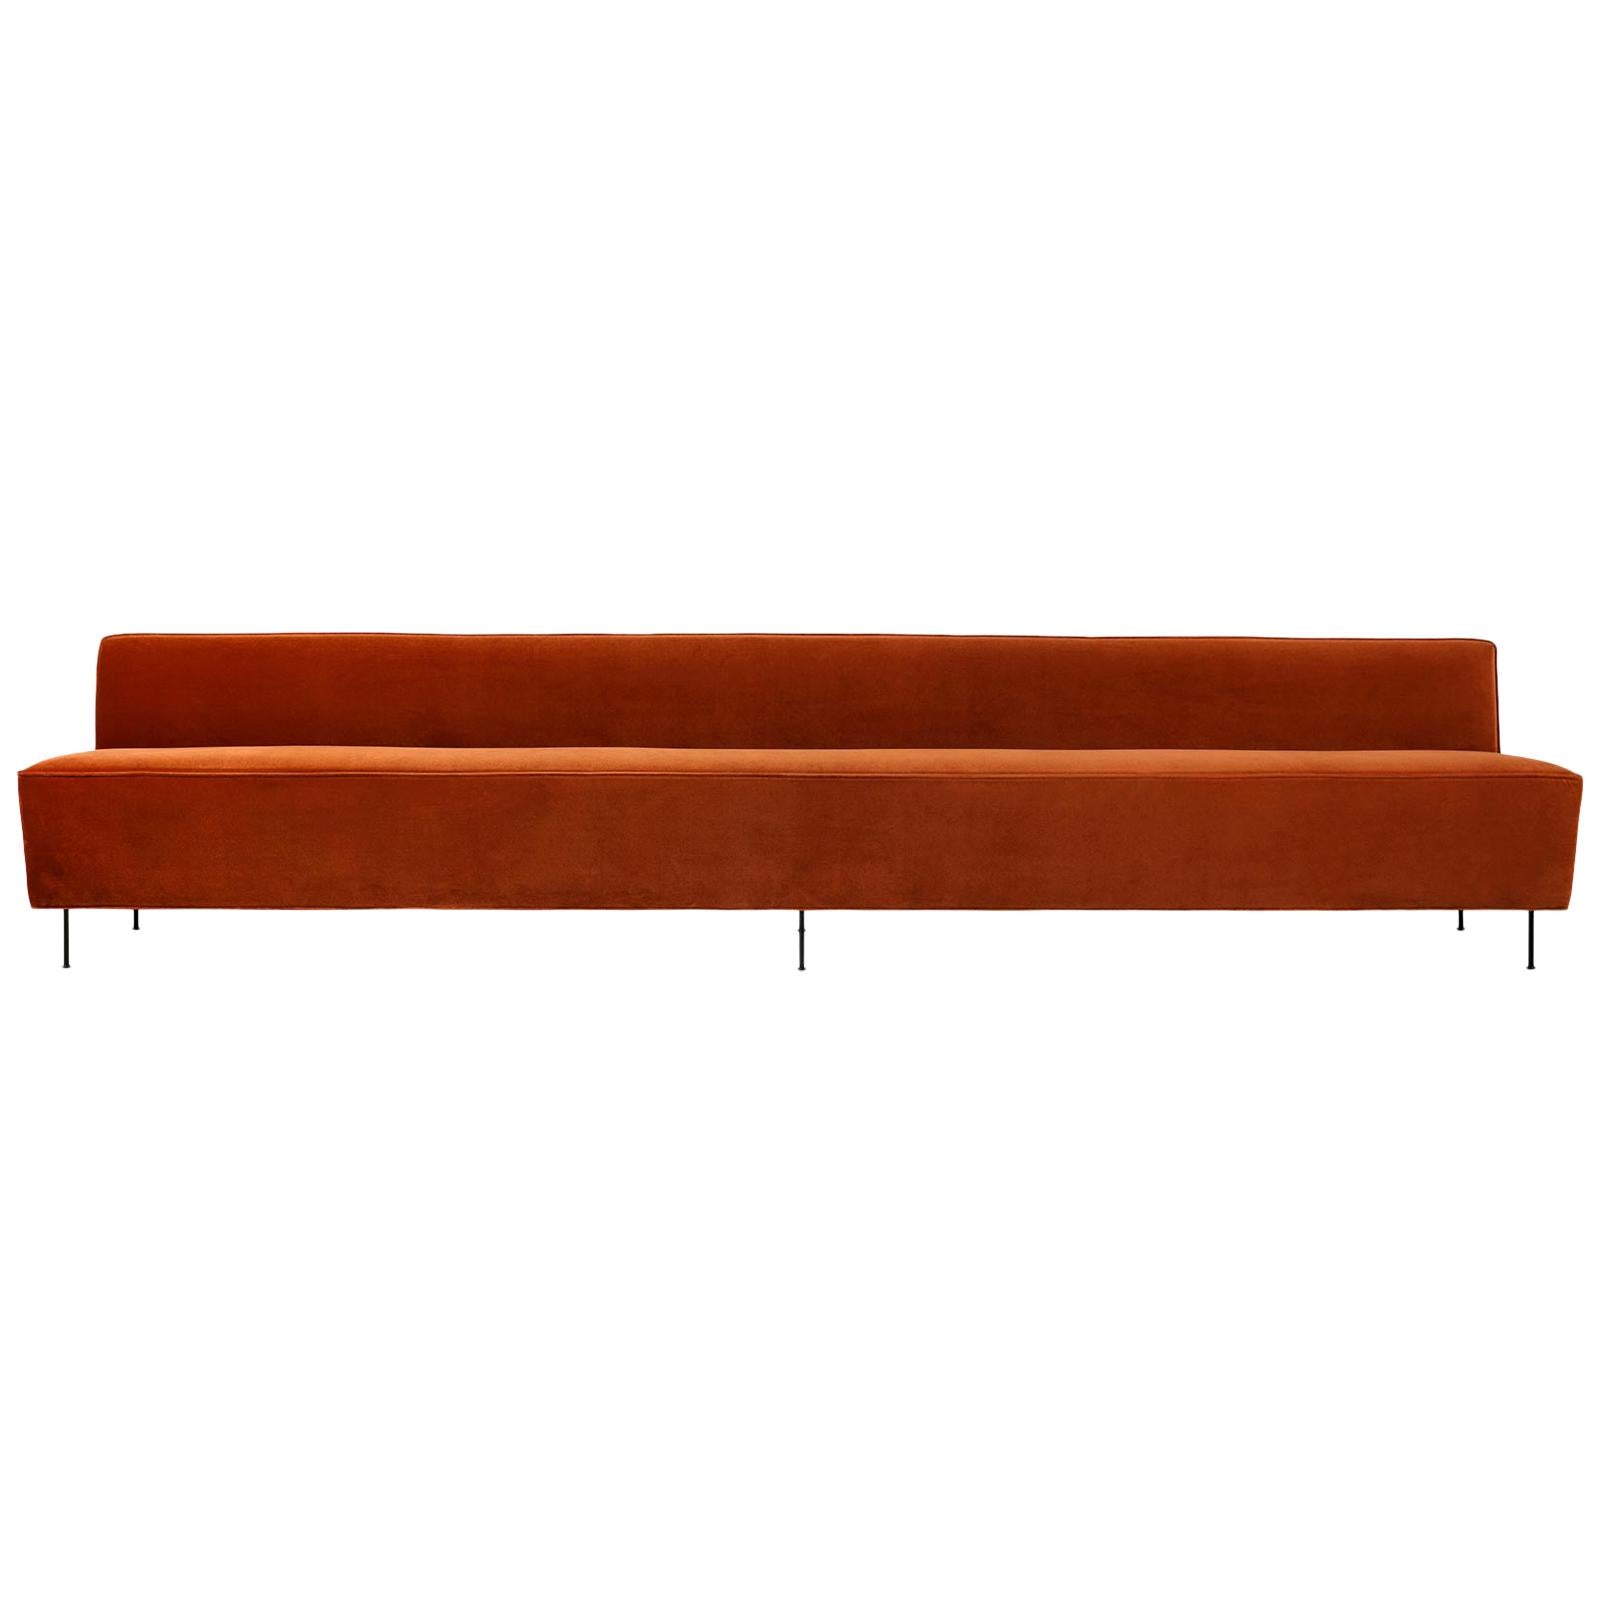 Modern Line Sofa, Dining Height, X-Large with Semi Matte Black Legs